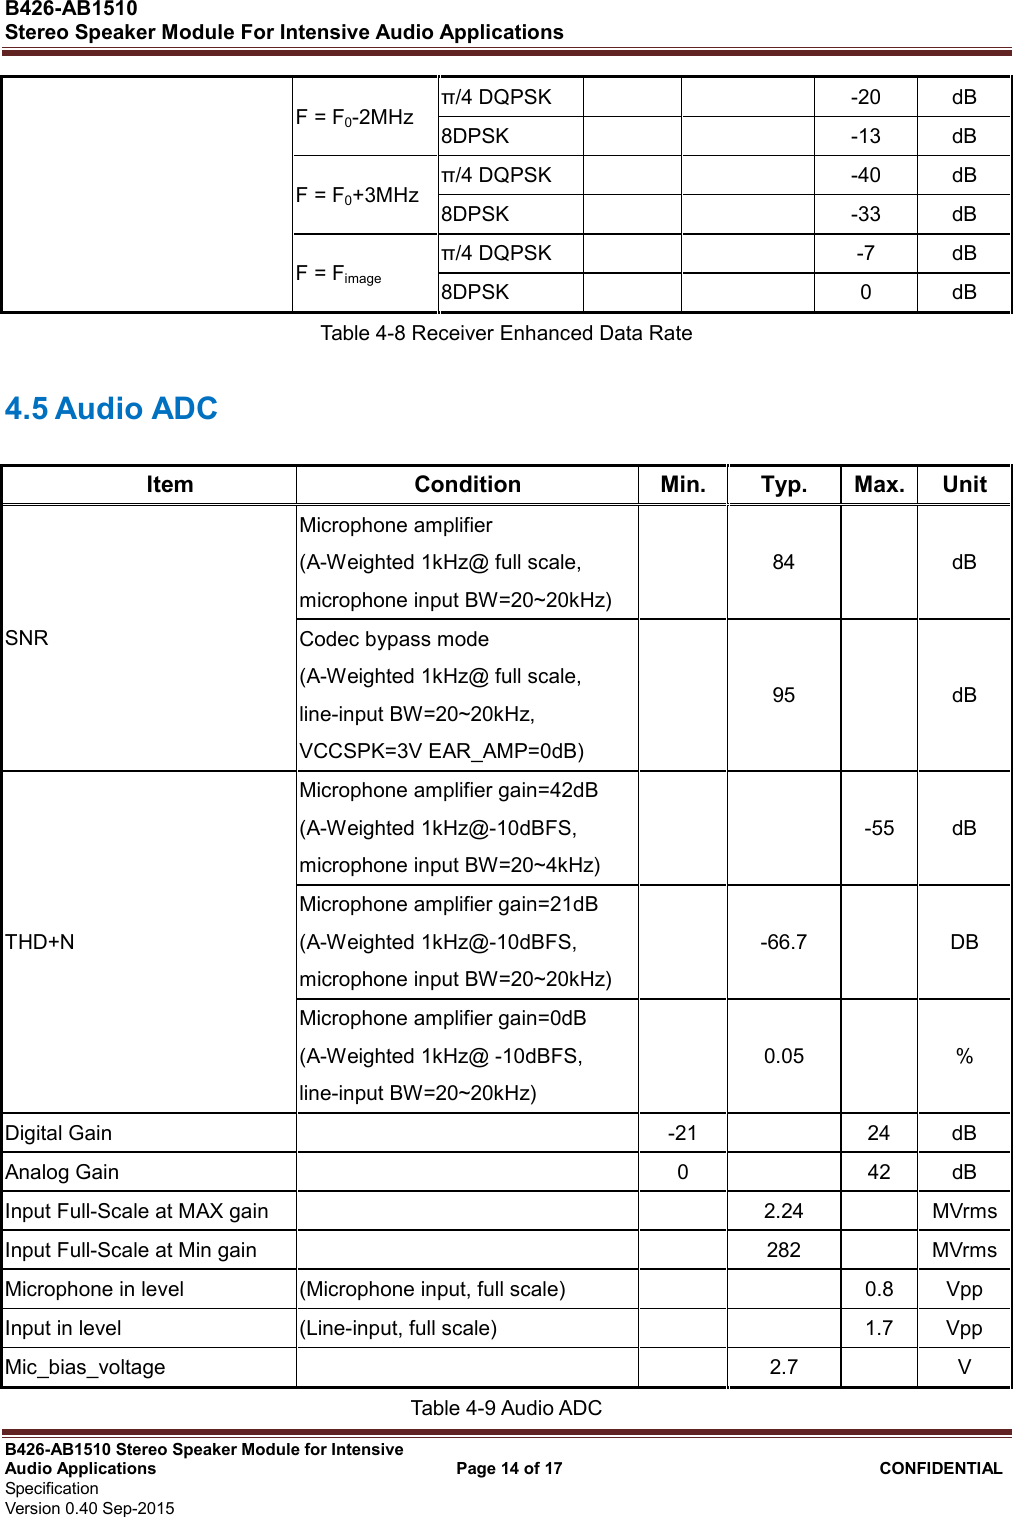  B426-AB1510   Stereo Speaker Module For Intensive Audio Applications                                                          B426-AB1510 Stereo Speaker Module for Intensive Audio Applications                                    Page 14 of 17                                      CONFIDENTIAL   Specification     Version 0.40 Sep-2015                     F = F0-2MHz π/4 DQPSK      -20  dB 8DPSK      -13  dB F = F0+3MHz π/4 DQPSK      -40  dB 8DPSK      -33  dB F = Fimage π/4 DQPSK      -7  dB 8DPSK      0  dB Table 4-8 Receiver Enhanced Data Rate 4.5 Audio ADC   Item  Condition  Min.  Typ.  Max. Unit SNR Microphone amplifier   (A-Weighted 1kHz@ full scale,   microphone input BW=20~20kHz)   84    dB Codec bypass mode (A-Weighted 1kHz@ full scale,   line-input BW=20~20kHz,   VCCSPK=3V EAR_AMP=0dB)   95    dB THD+N Microphone amplifier gain=42dB (A-Weighted 1kHz@-10dBFS, microphone input BW=20~4kHz)     -55  dB Microphone amplifier gain=21dB (A-Weighted 1kHz@-10dBFS, microphone input BW=20~20kHz)   -66.7    DB Microphone amplifier gain=0dB   (A-Weighted 1kHz@ -10dBFS,   line-input BW=20~20kHz)   0.05    % Digital Gain    -21    24  dB Analog Gain    0    42  dB Input Full-Scale at MAX gain      2.24    MVrms Input Full-Scale at Min gain      282    MVrms Microphone in level    (Microphone input, full scale)      0.8  Vpp Input in level    (Line-input, full scale)      1.7  Vpp Mic_bias_voltage      2.7    V Table 4-9 Audio ADC 